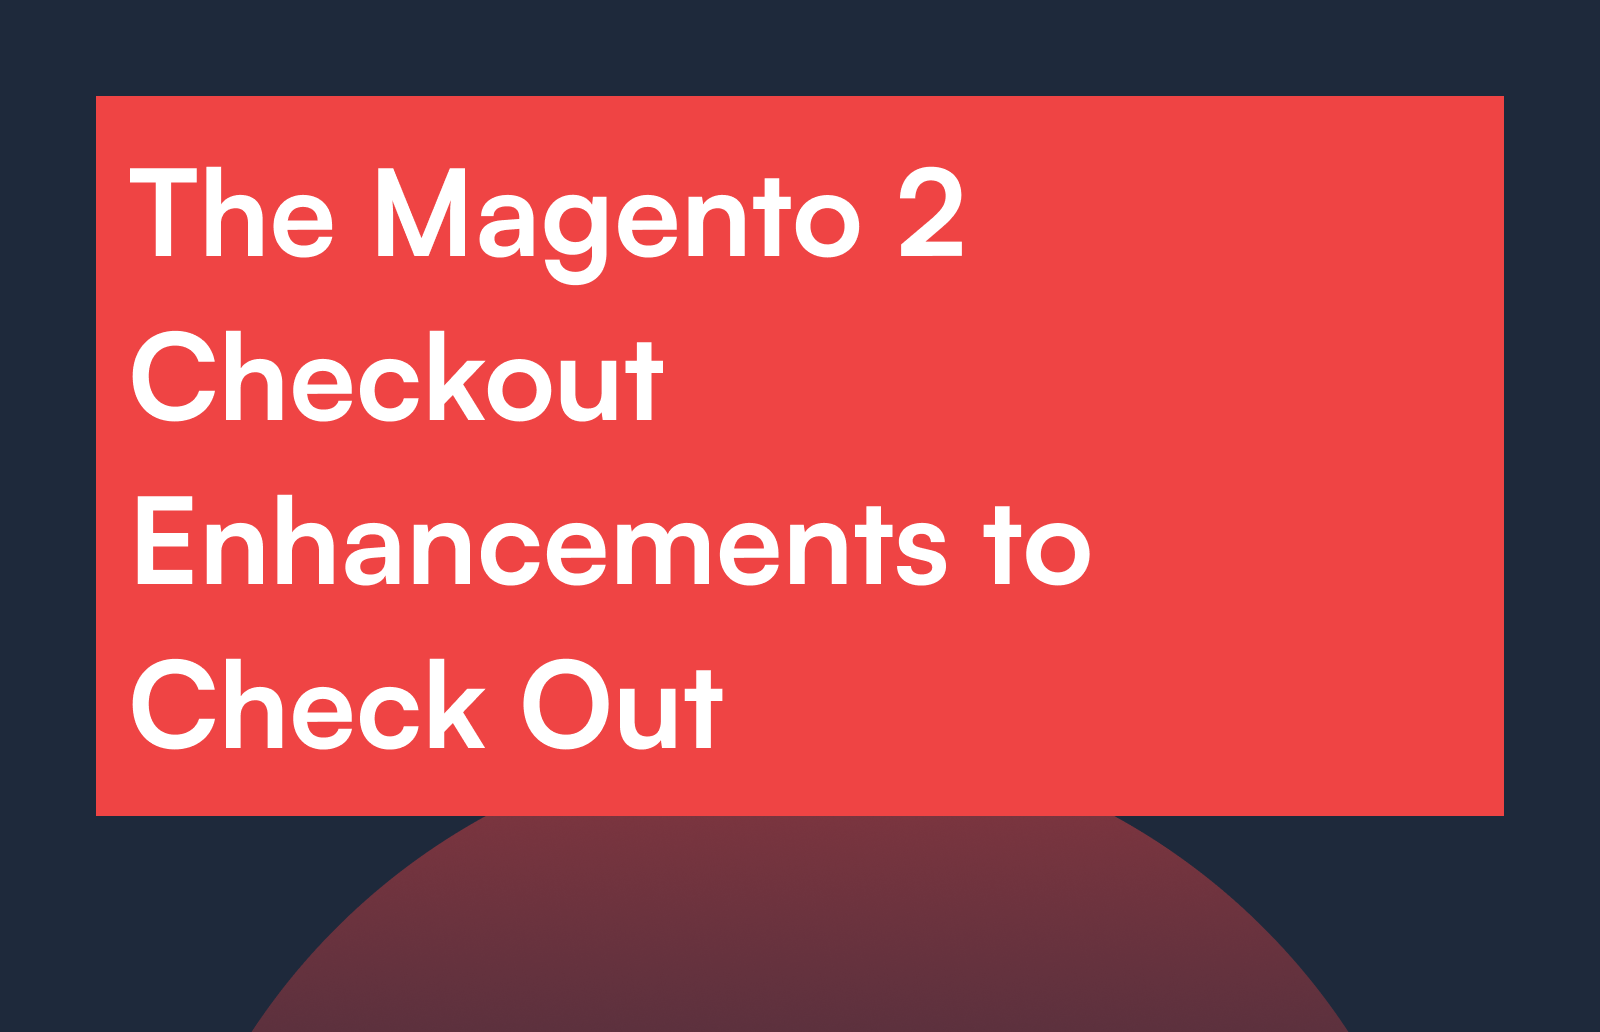 The Magento 2 Checkout Enhancements to Check Out